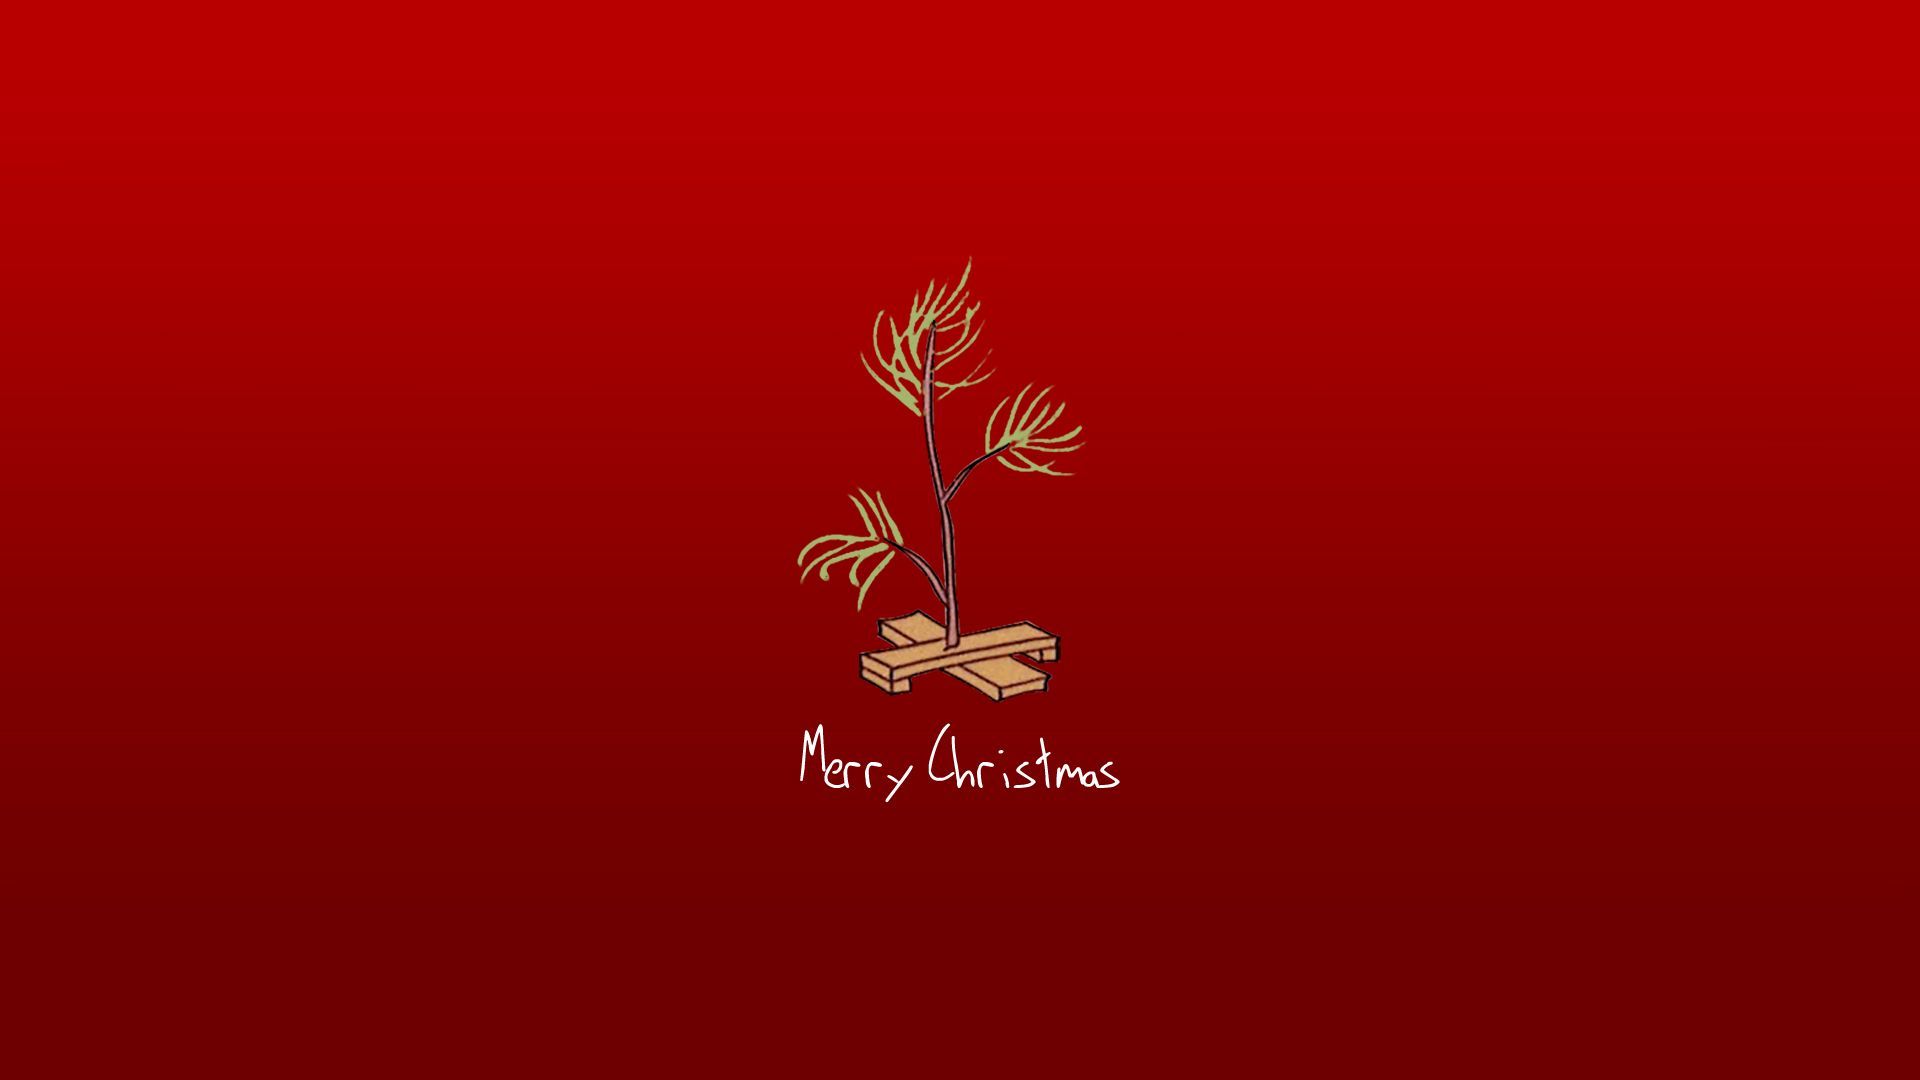 Charlie Brown Christmas  riphonexwallpapers